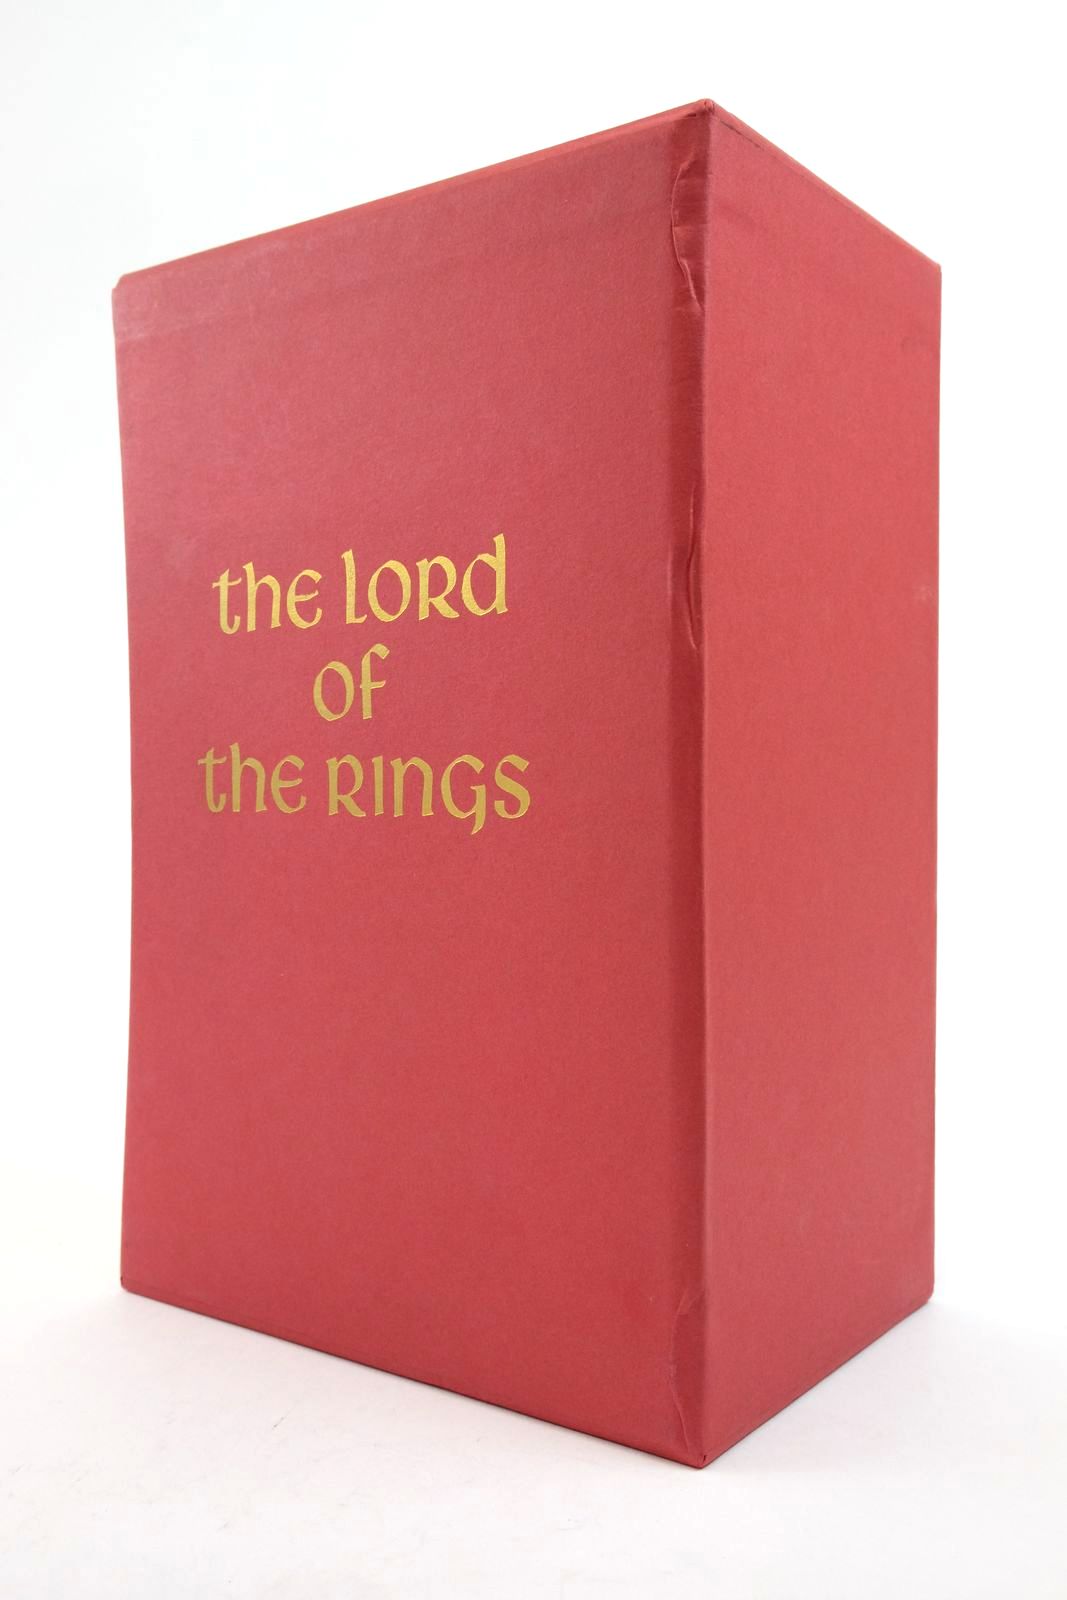 Photo of THE LORD OF THE RINGS (3 VOLUMES) written by Tolkien, J.R.R. illustrated by Grathmer, Ingahild
Fraser, Eric published by Folio Society (STOCK CODE: 2138771)  for sale by Stella & Rose's Books